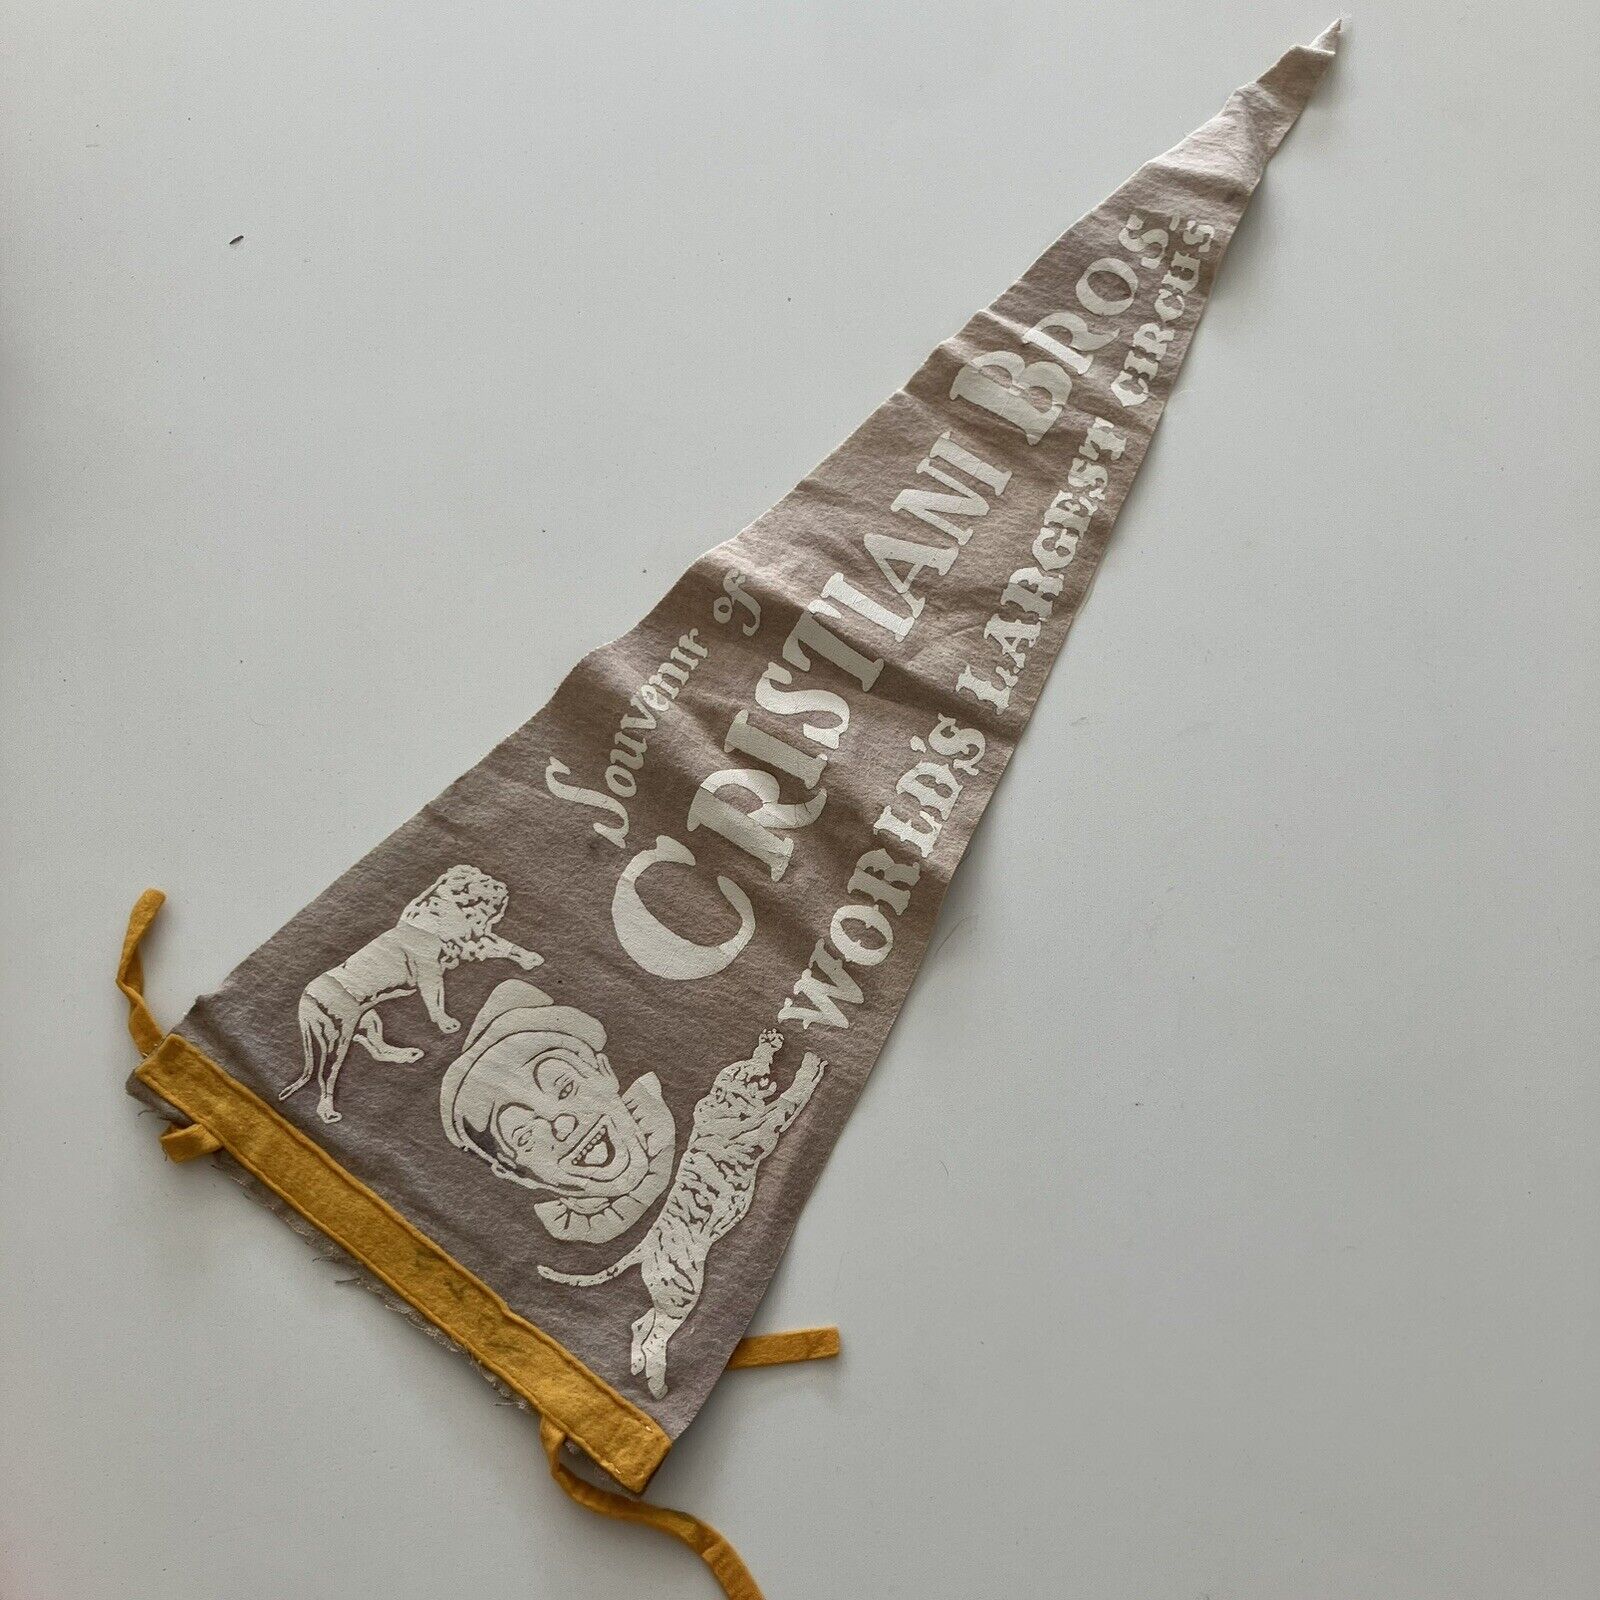 VTG cristiani circus Pennant Vintage OLD 24” worlds largest circus